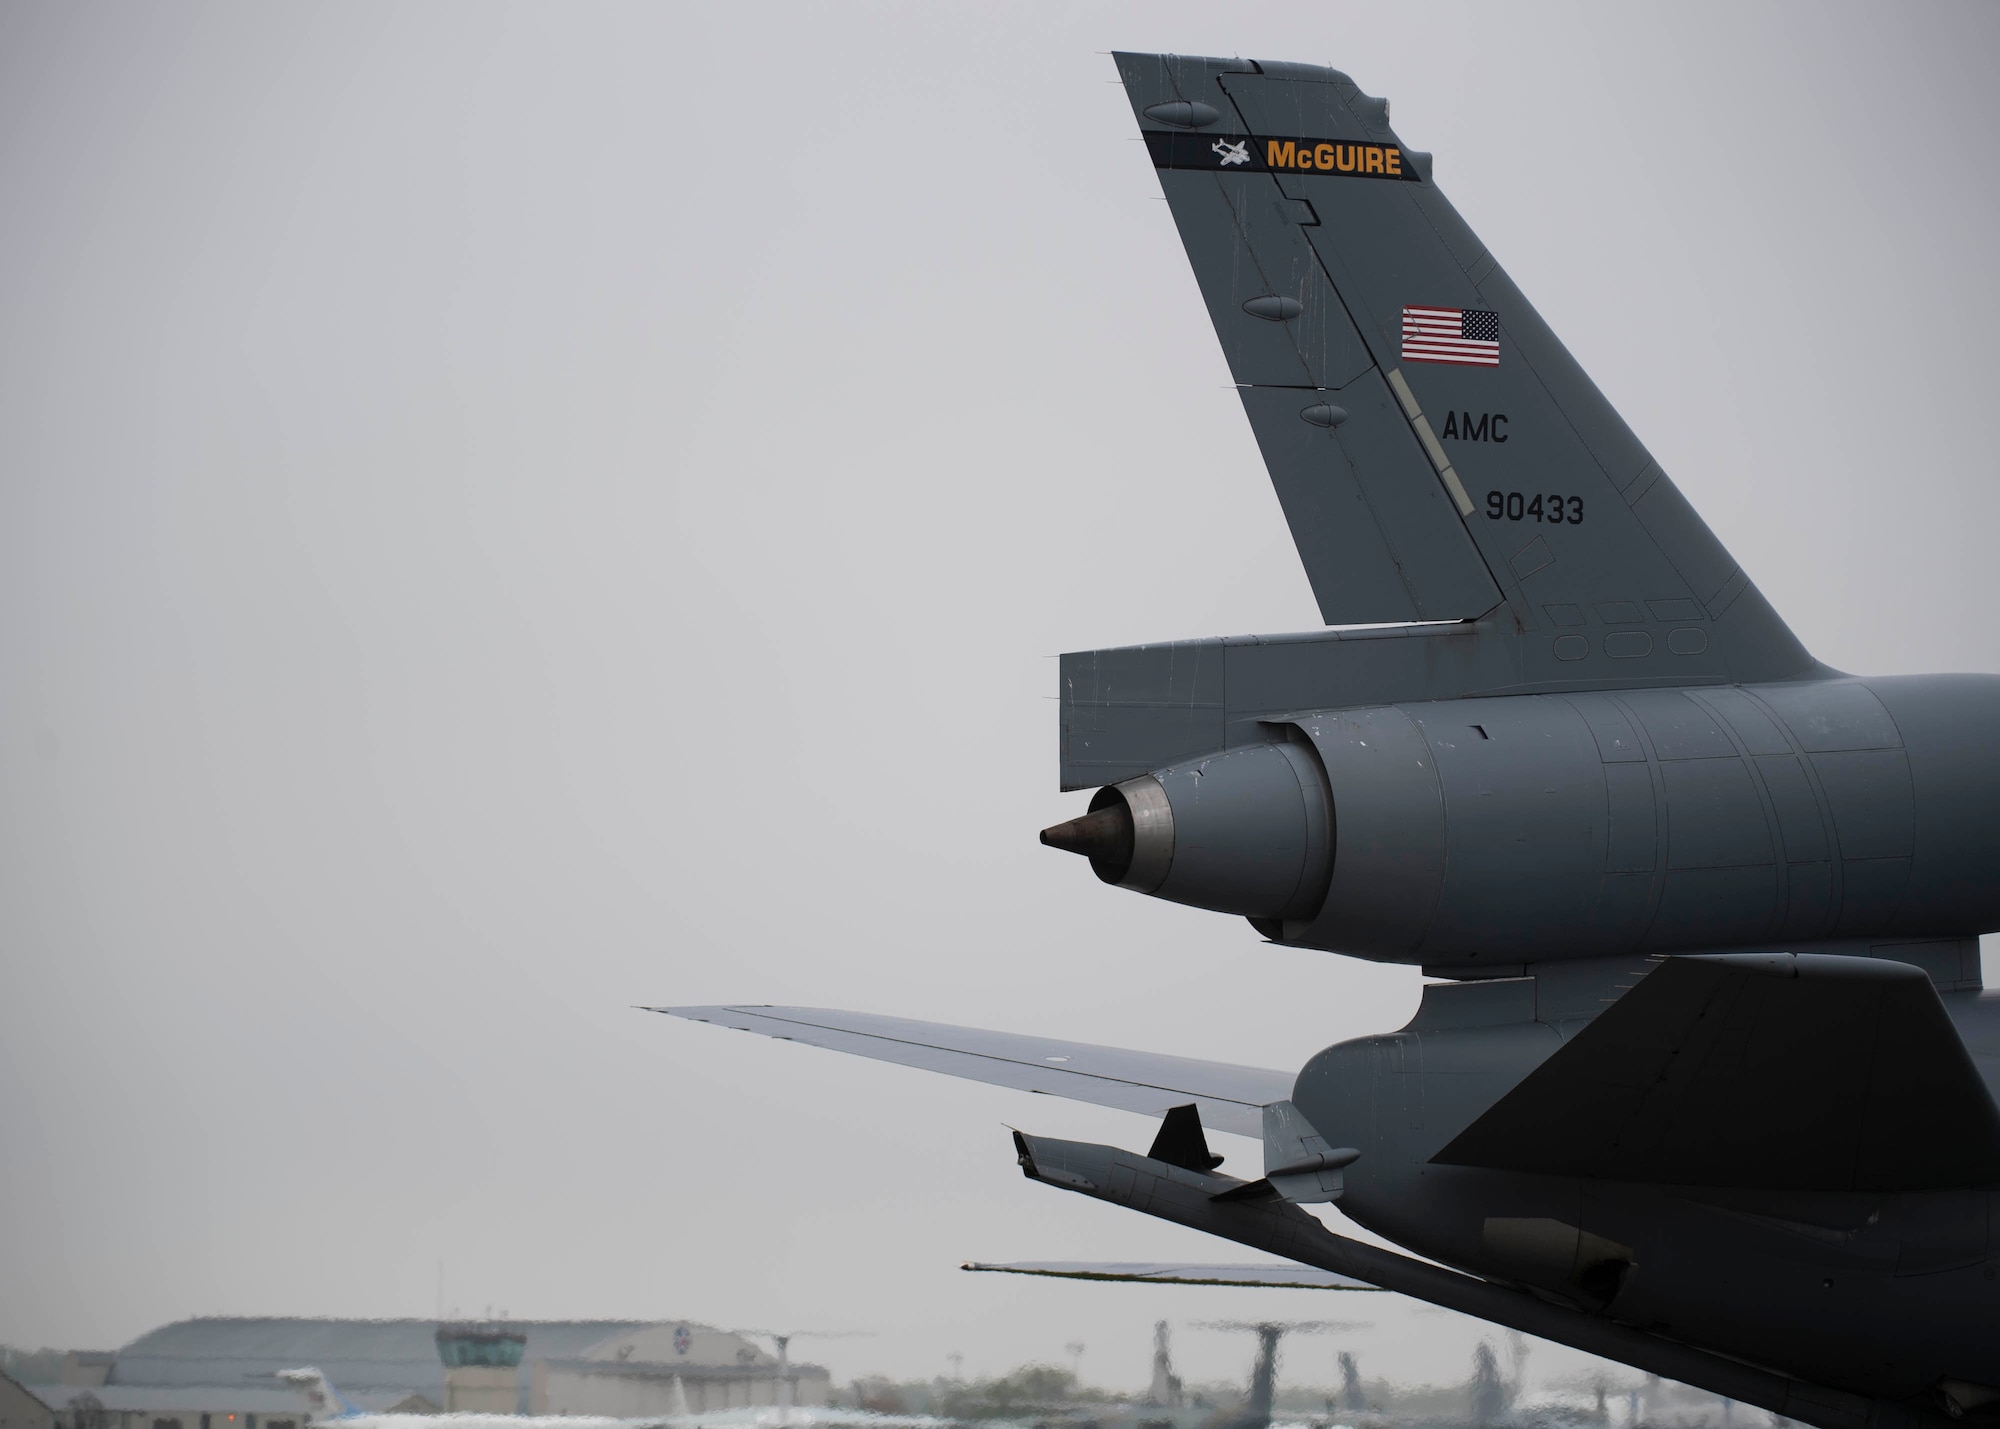 The first KC-10 Extender ever produced arrives at Dover Air Force Base, Delaware, April 26, 2022. The KC-10 was stationed at Joint Base McGuire-Dix-Lakehurst, New Jersey, before being retired to the Air Mobility Command museum. (U.S. Air Force photo by Tech. Sgt. J.D. Strong II)